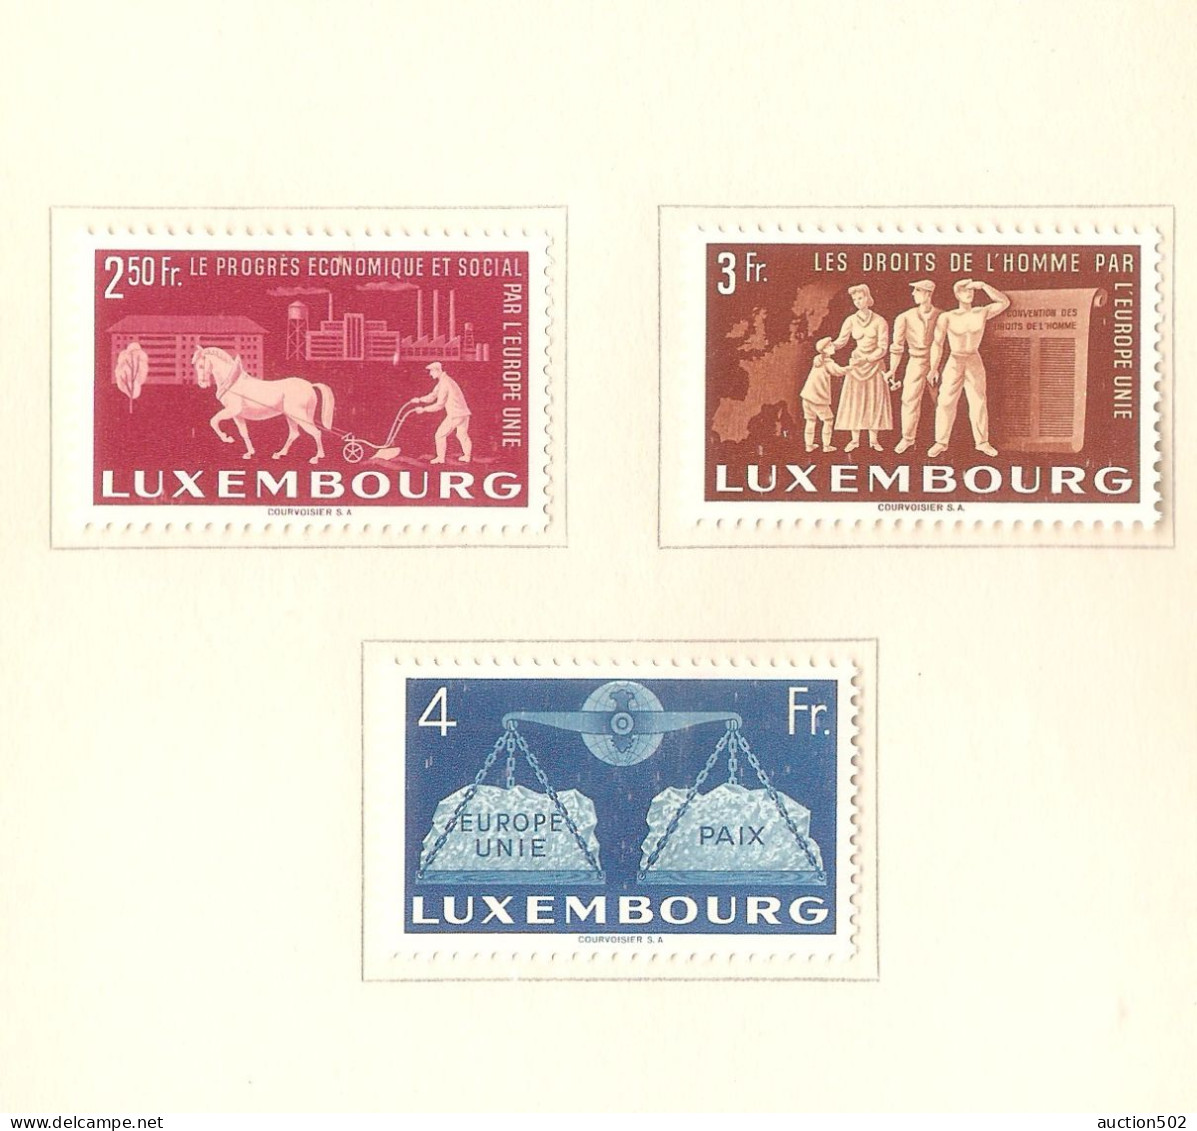 Luxemburg  Stamps year between 1948 > 1950 * HINGED